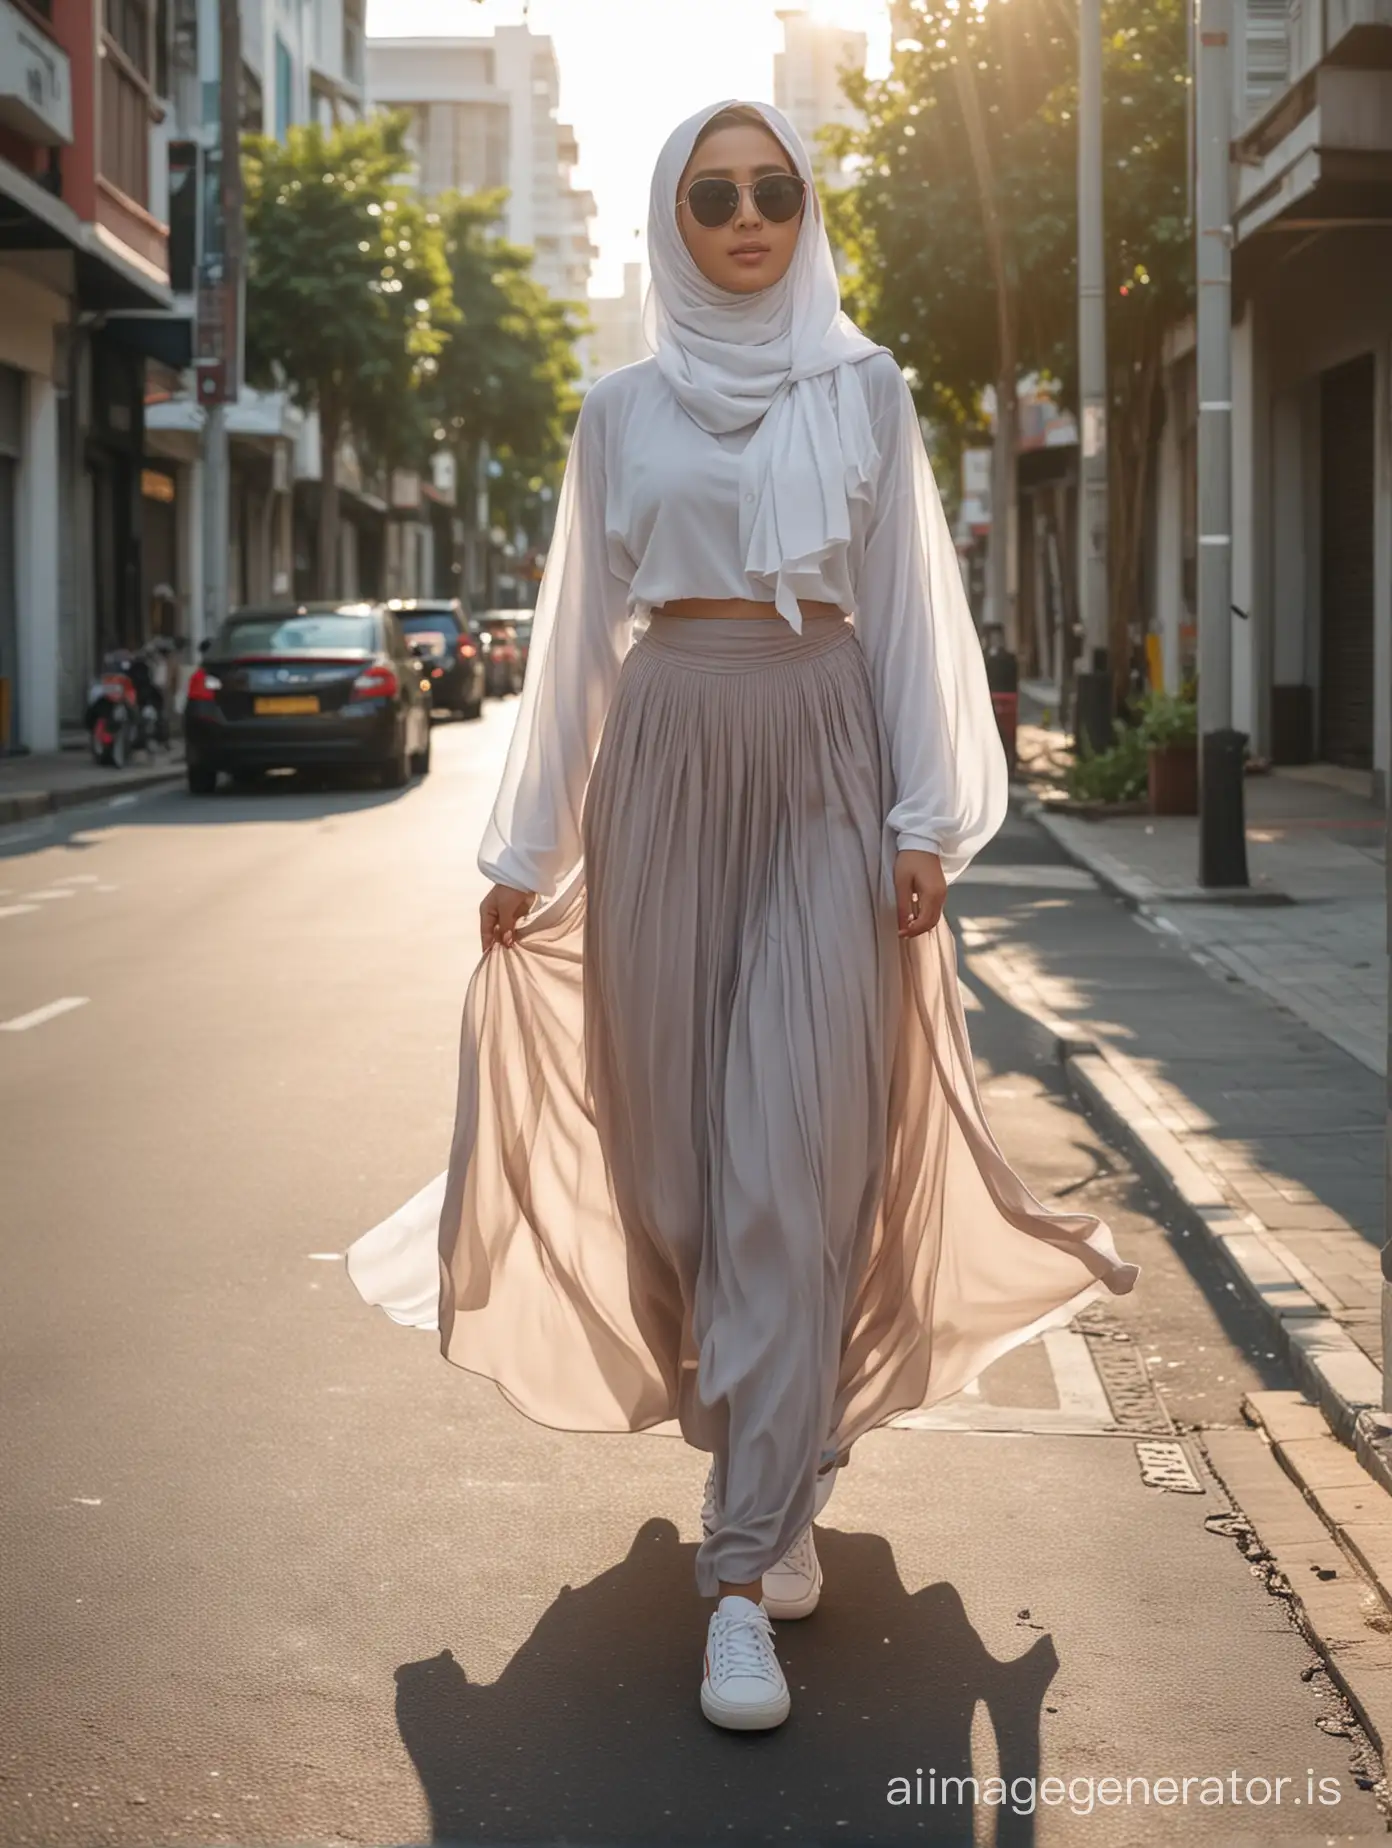 Malaysian-Girl-in-Flowing-Skirt-and-Hijab-Walking-on-Street